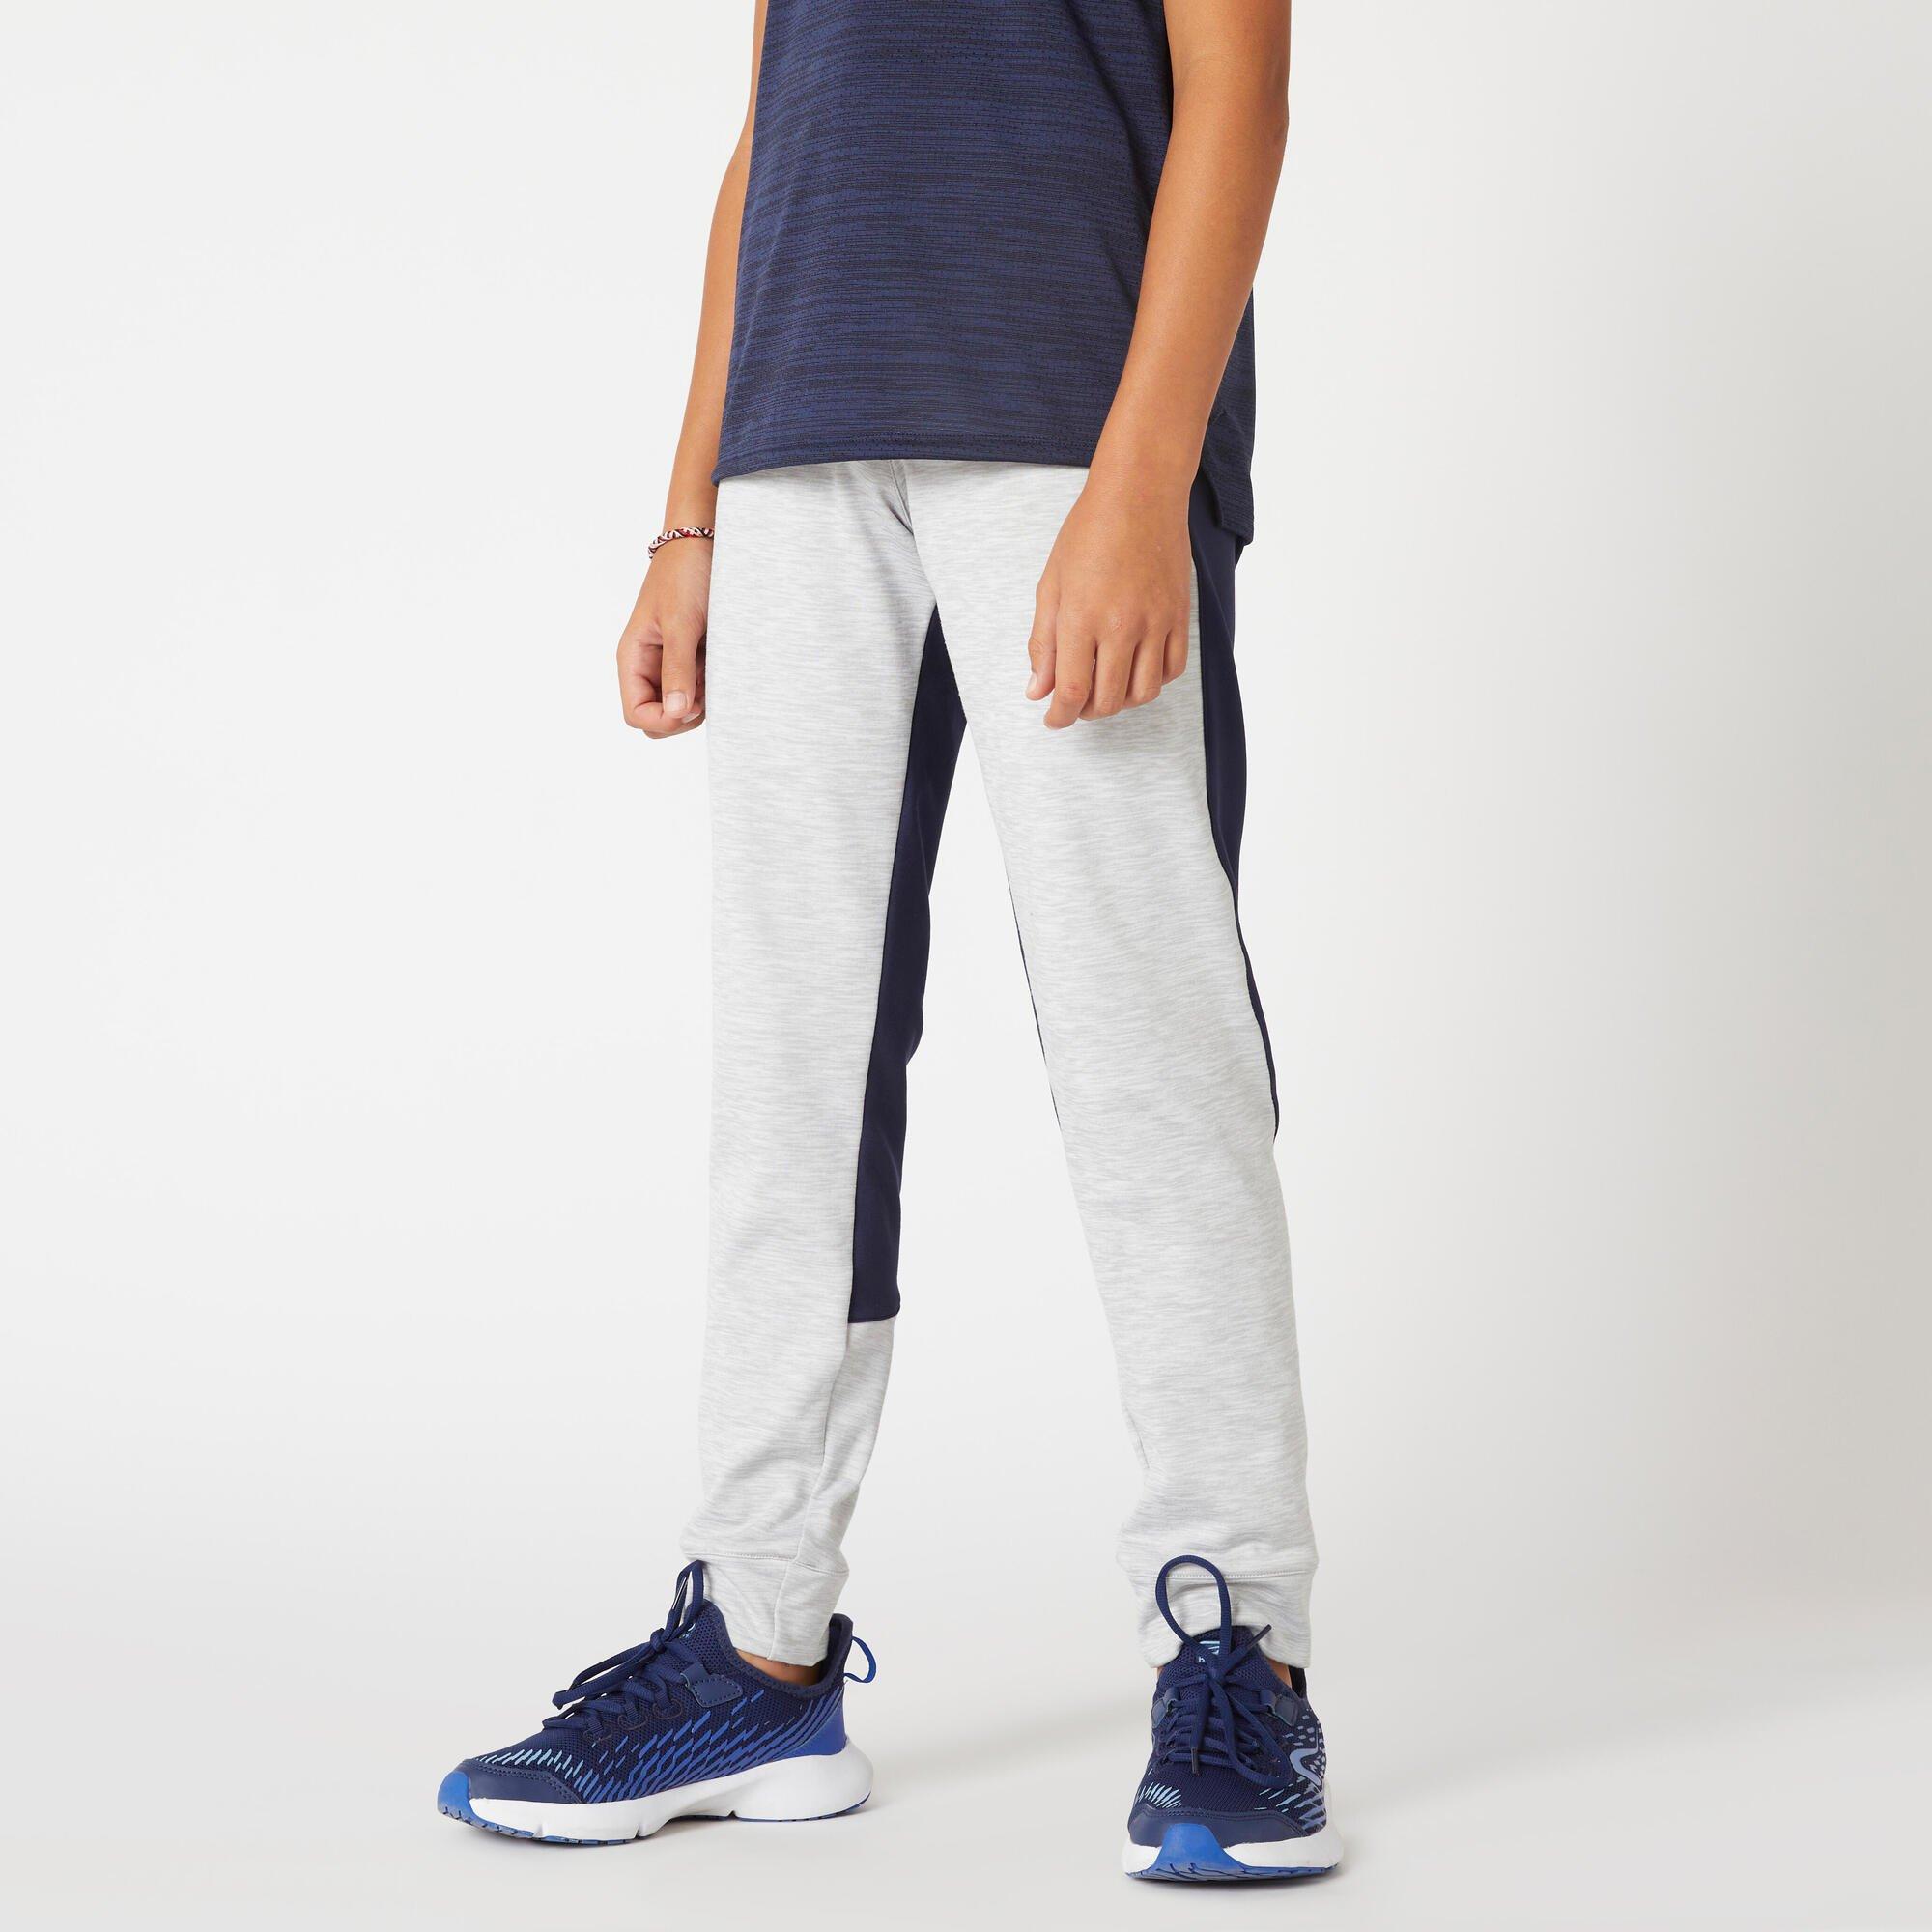 Decathlon Warm And Breathable Jogging Bottoms product